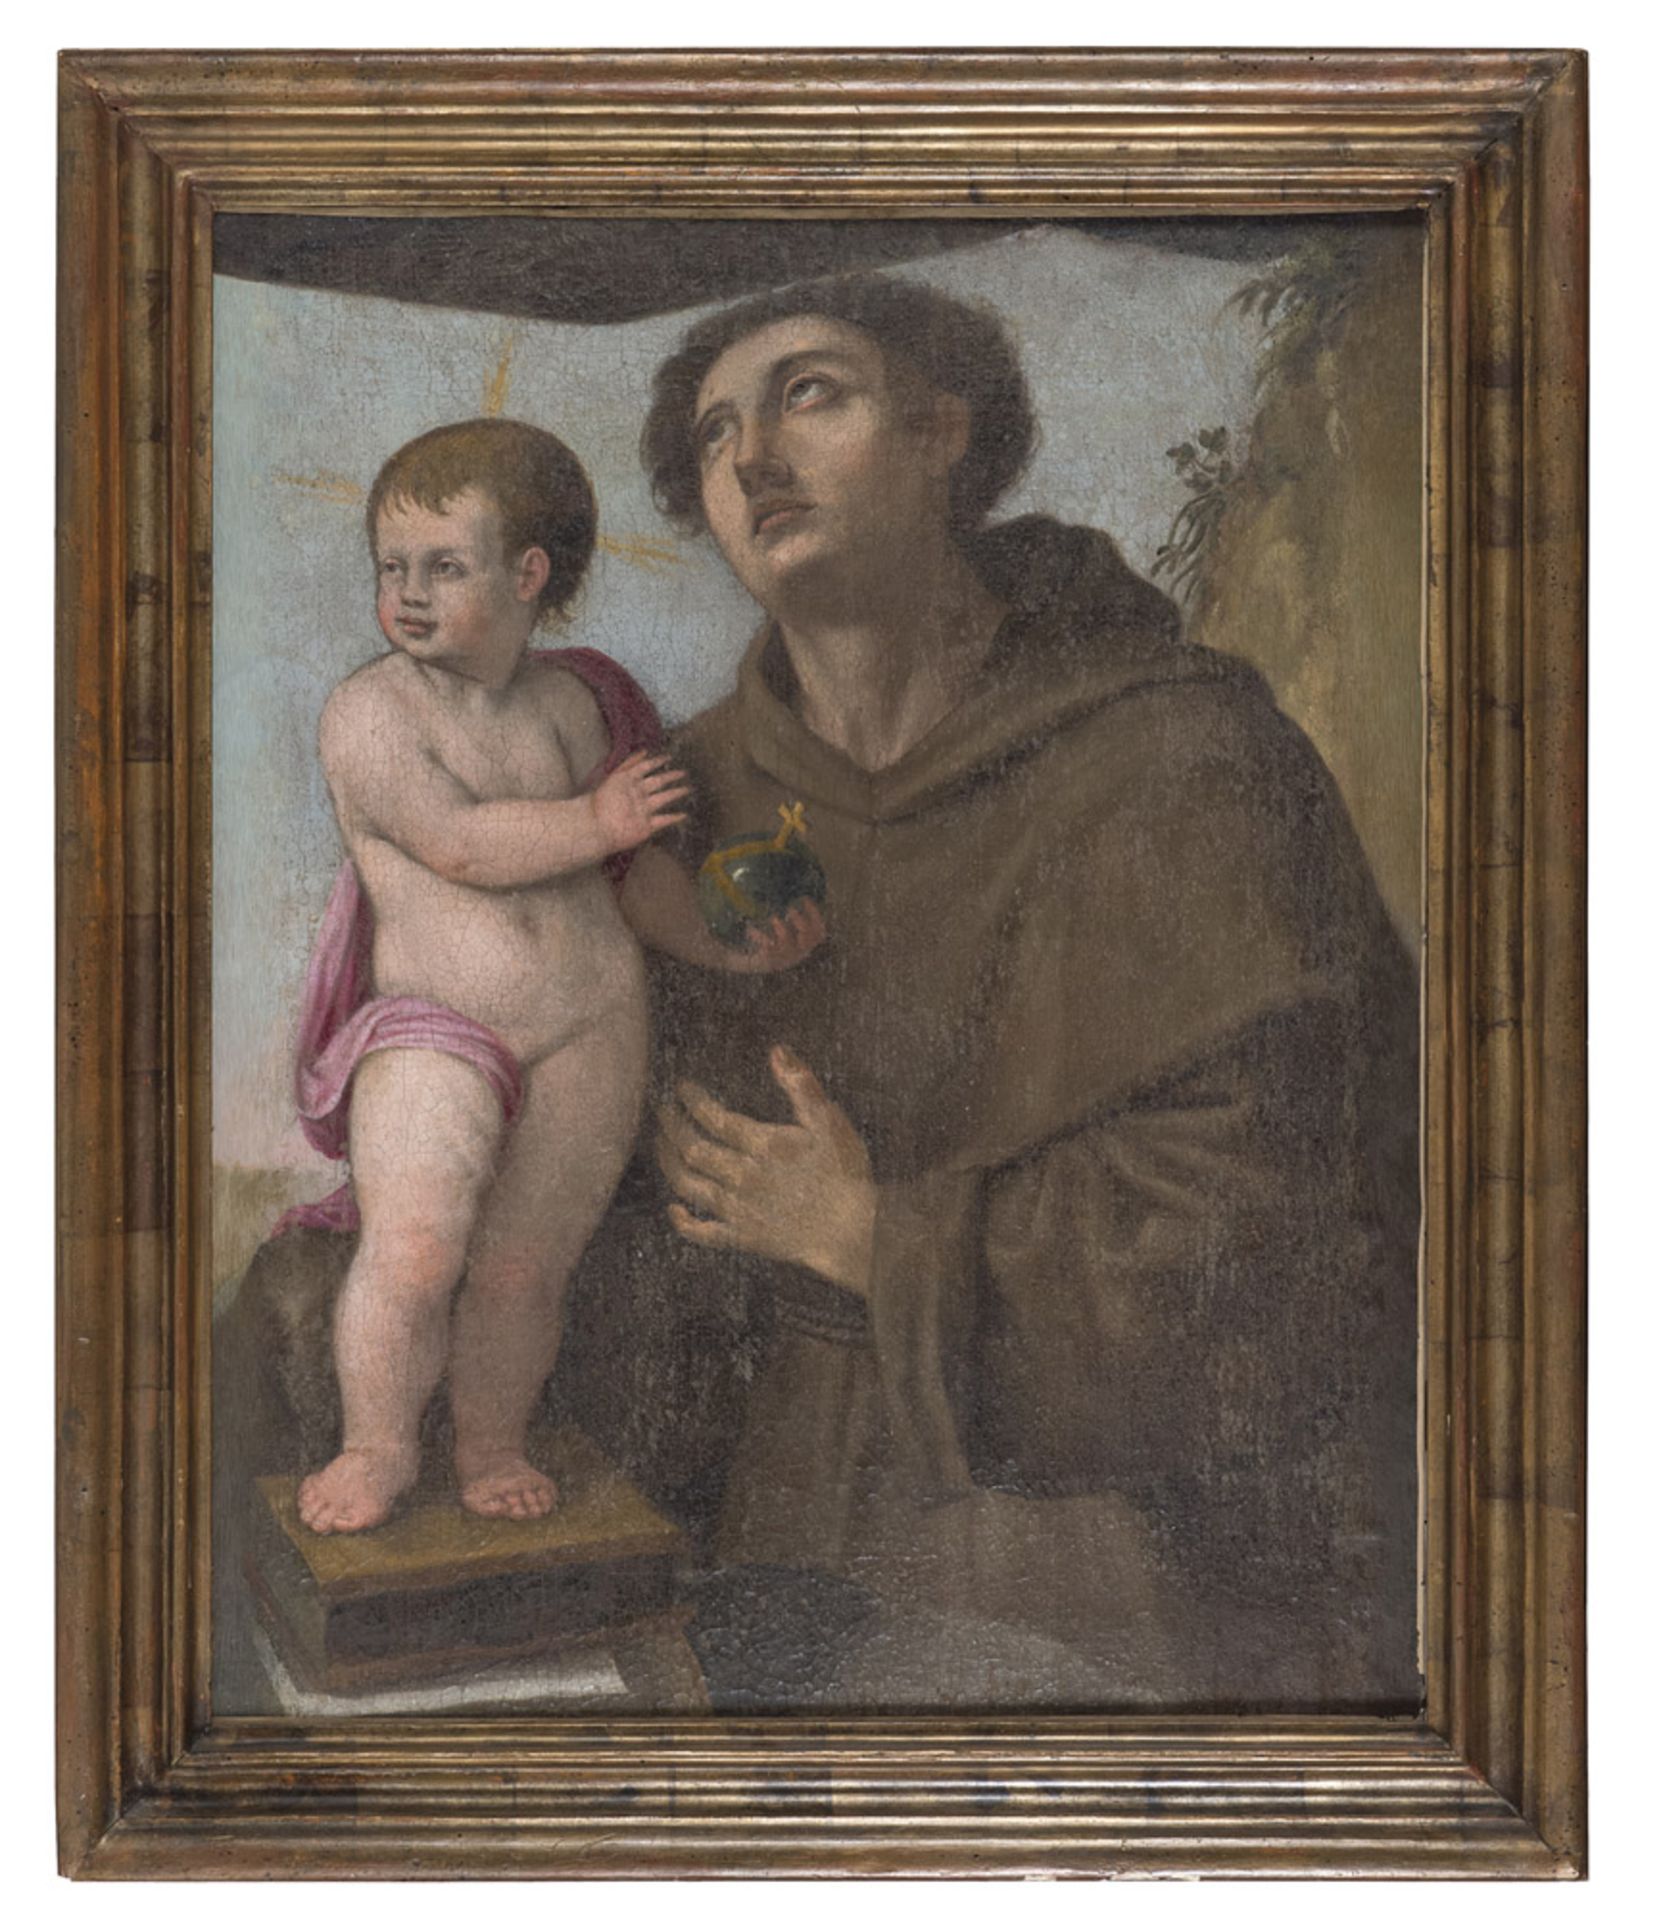 Northern Italy Painter, 17th century. Saint Antony from Padua with Child. Oil on canvas, cm. 68 x